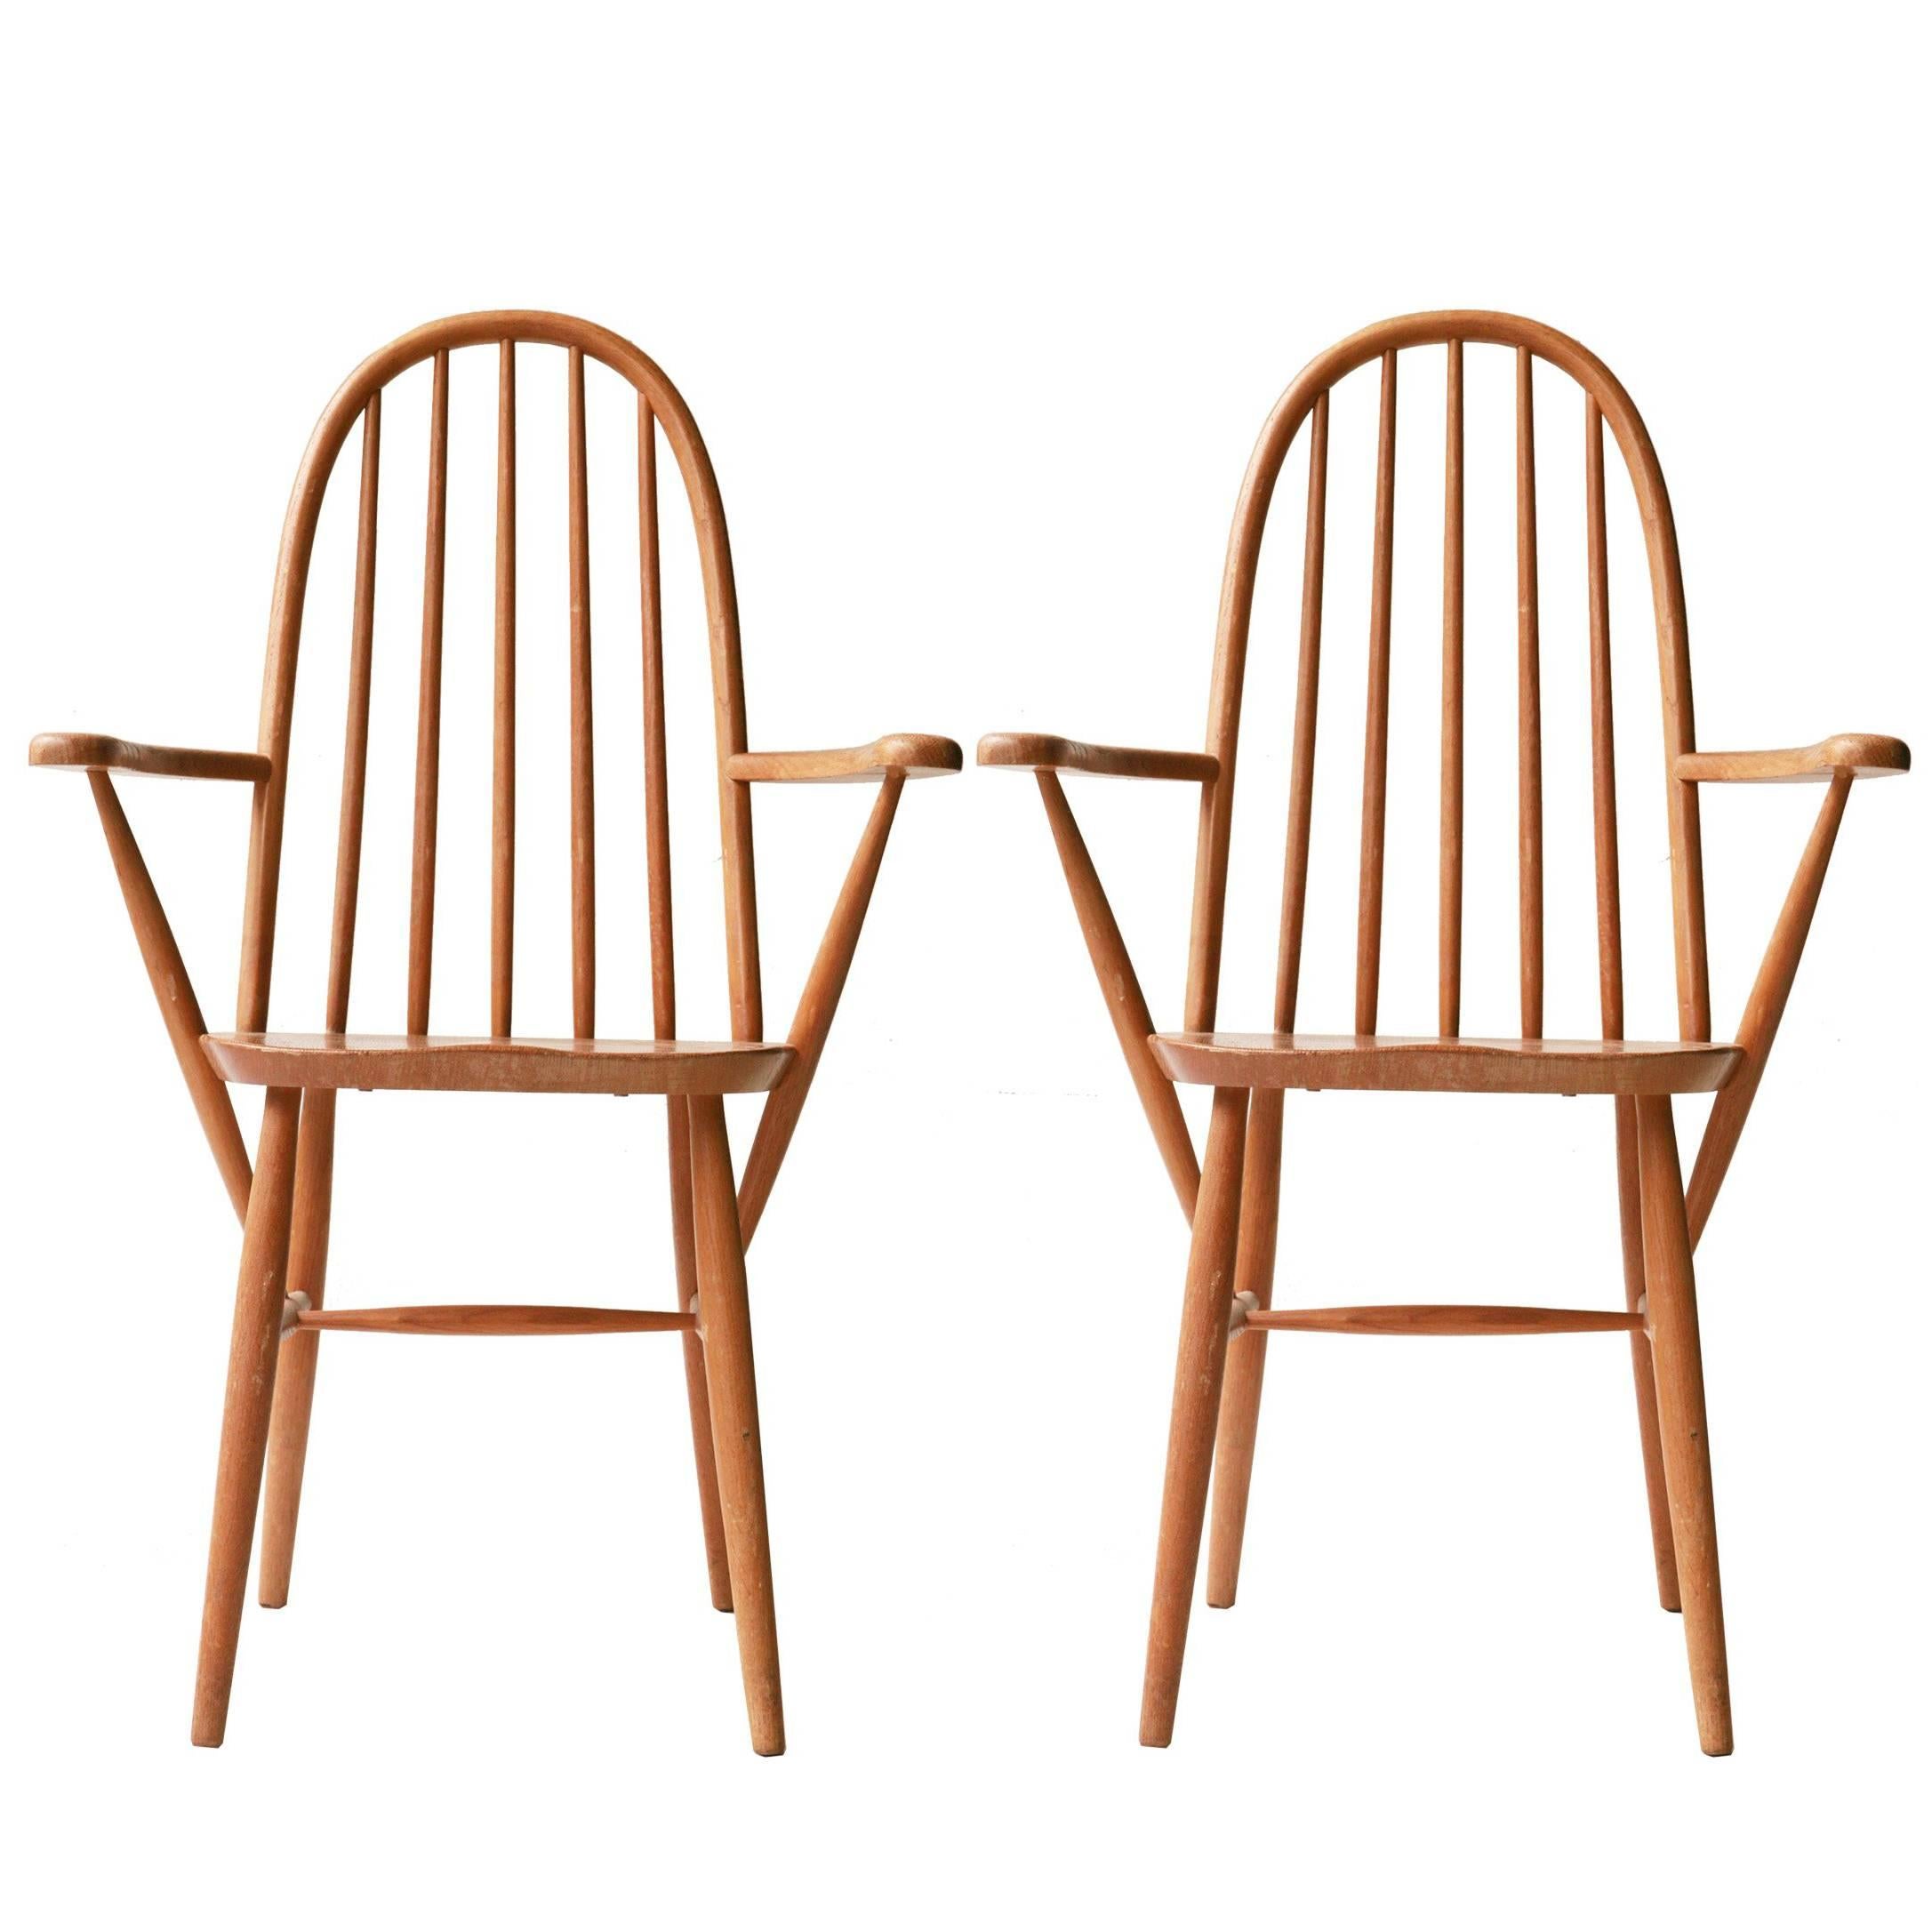 Pair of Oak Armchairs. France, 1950.